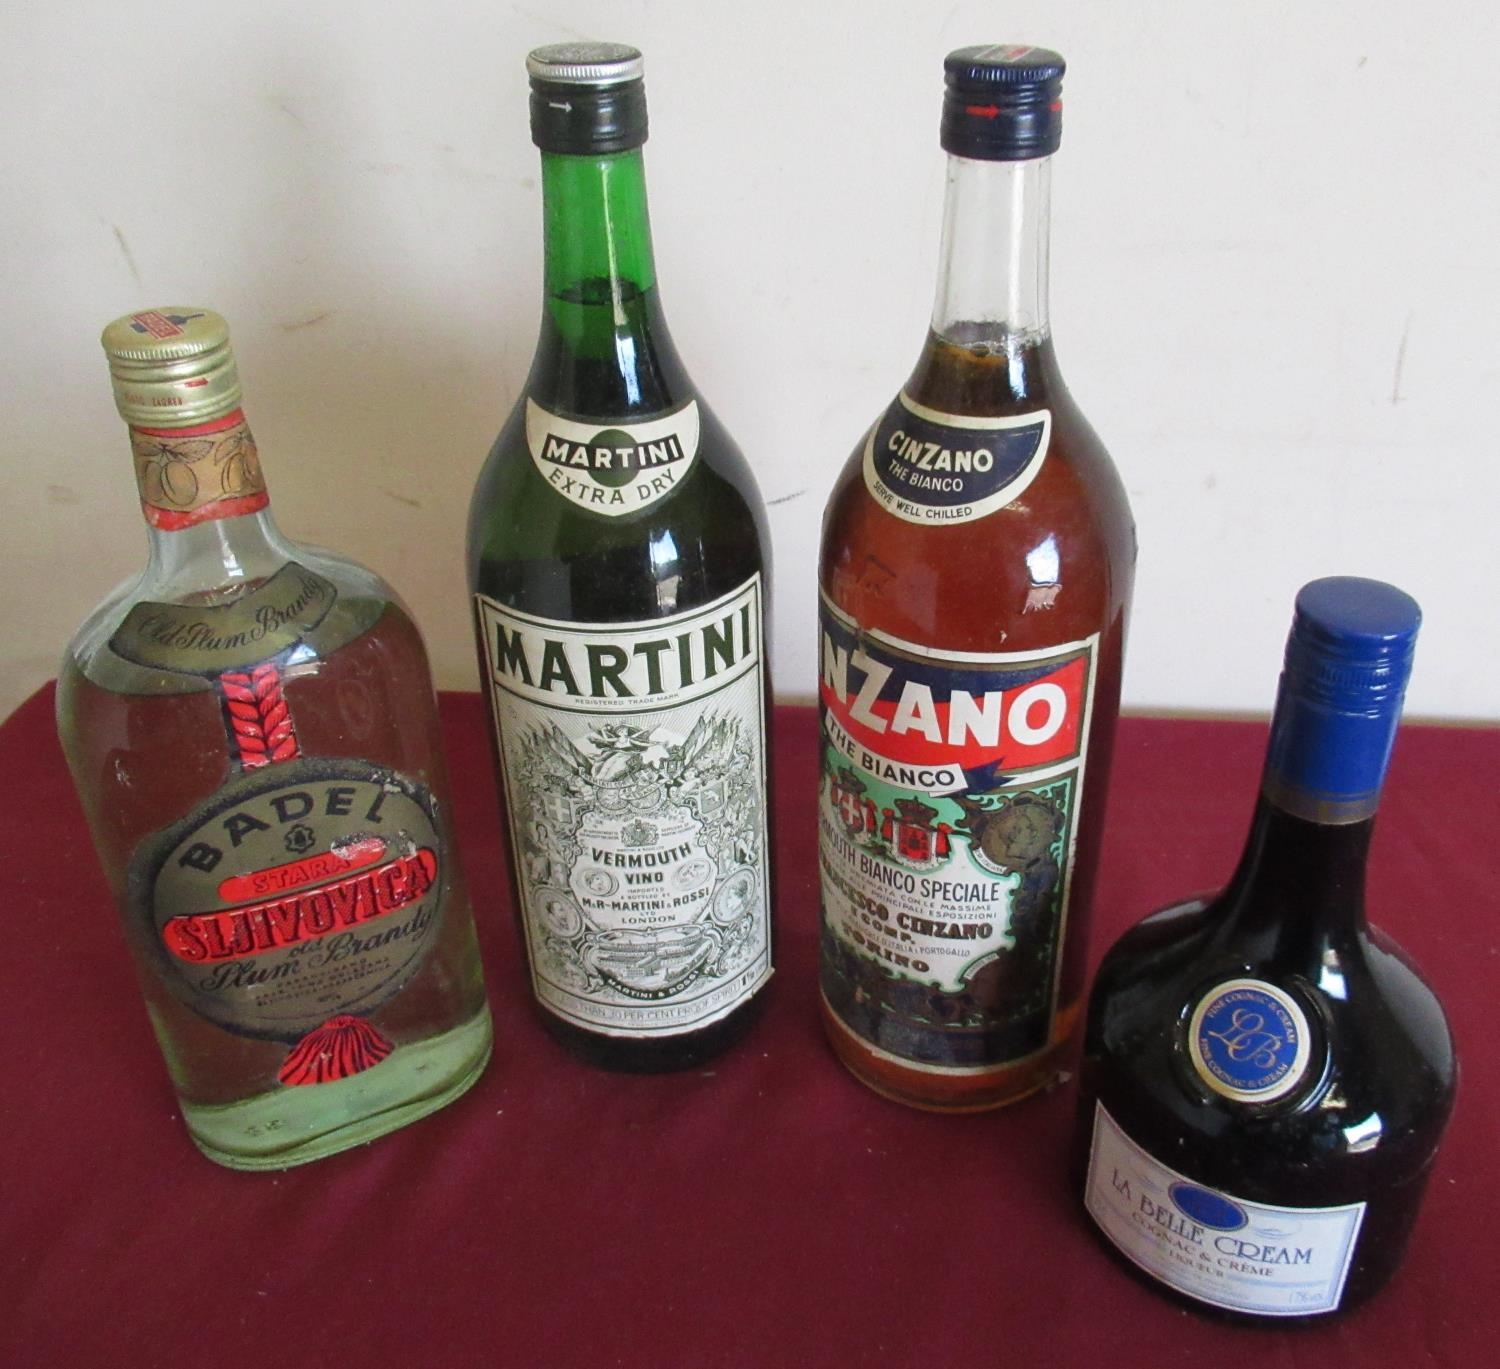 Martini Vermouth, 1.5l not less than 30% proof, Chinzano The Bianco, 1.5l  no proof visible, Badel St